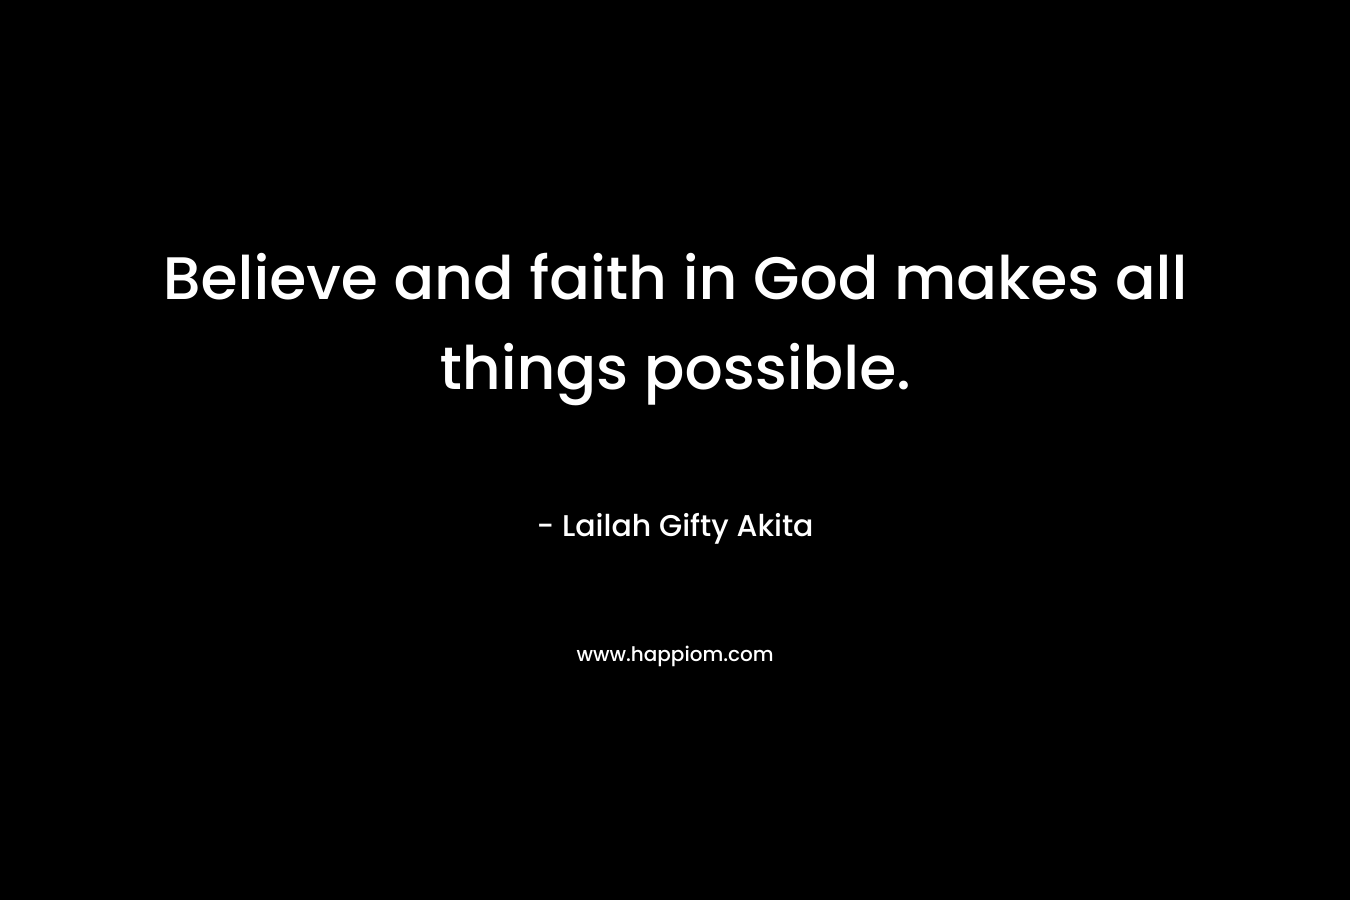 Believe and faith in God makes all things possible.